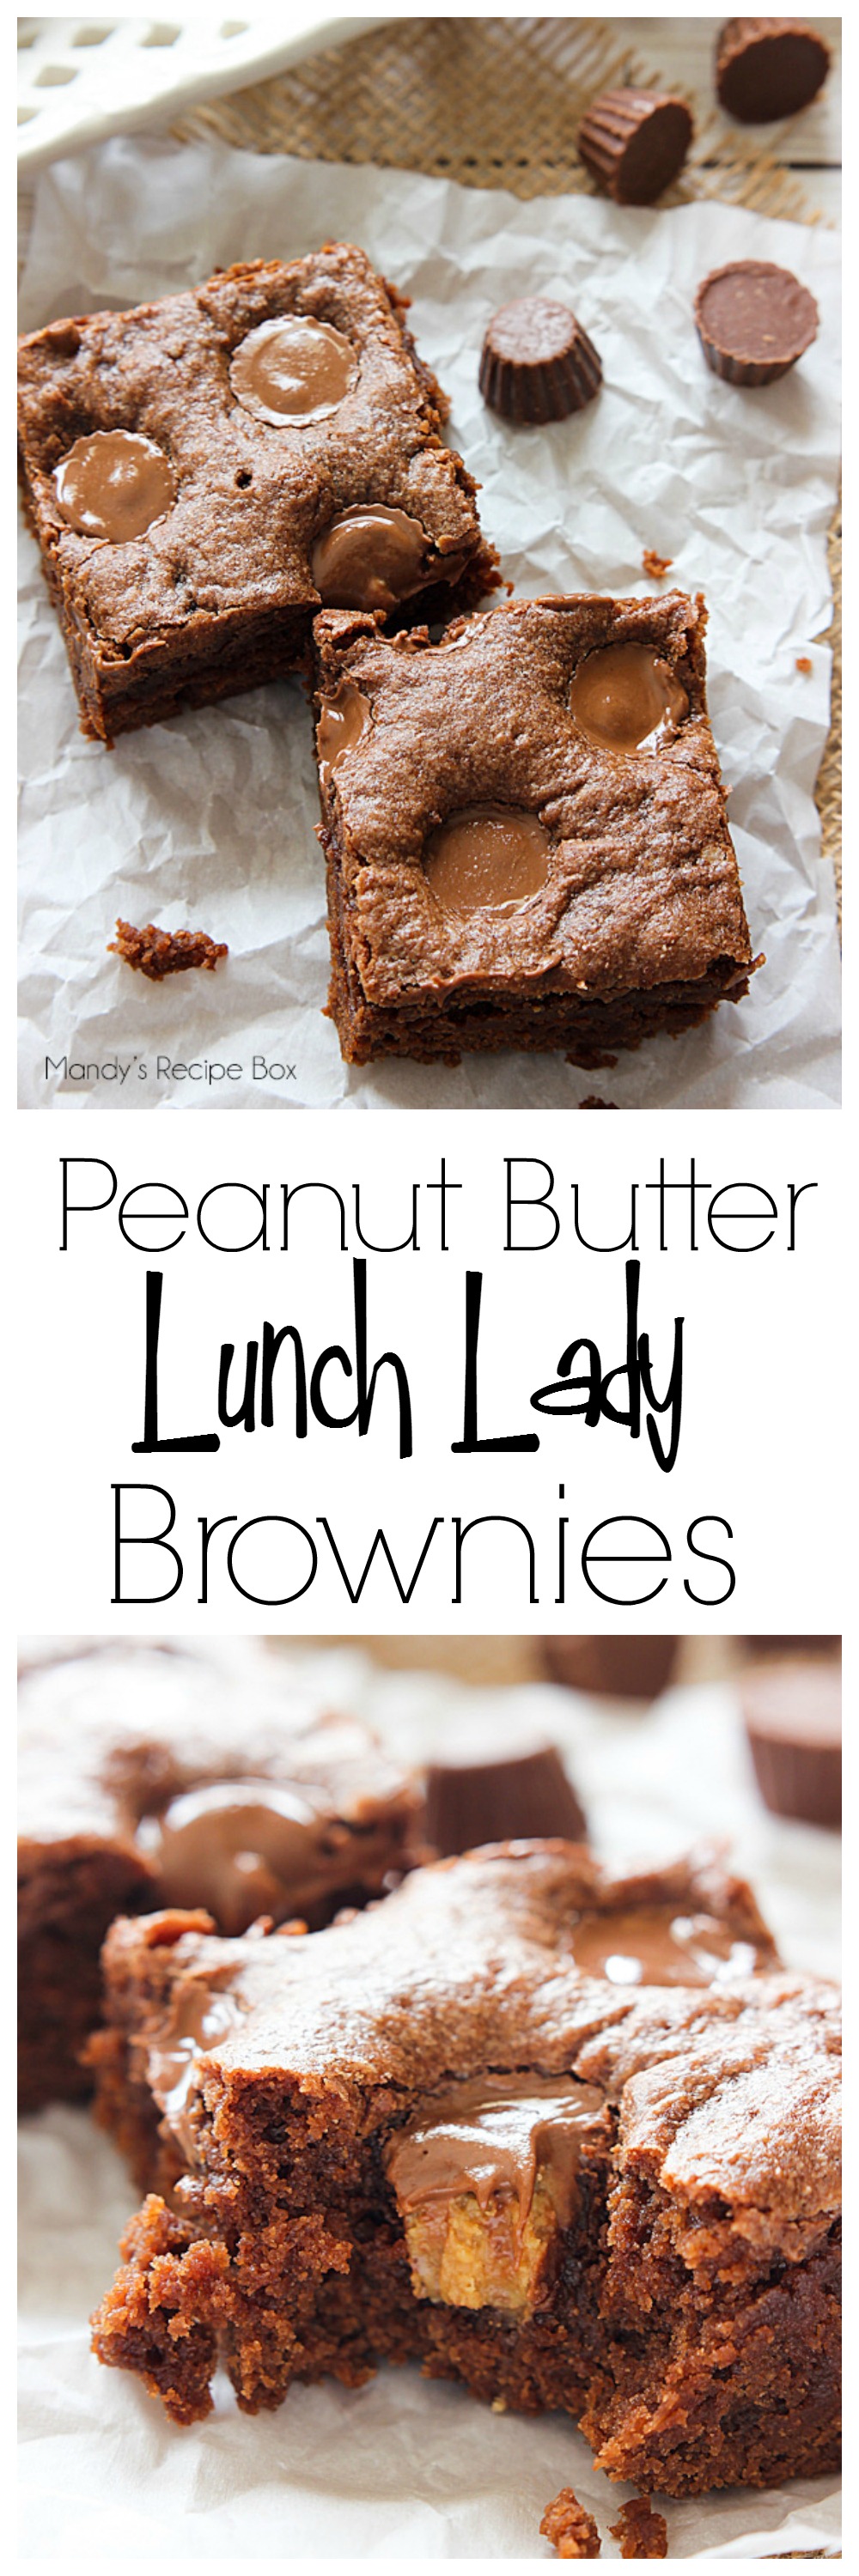 Peanut Butter Lunch Lady Brownies 